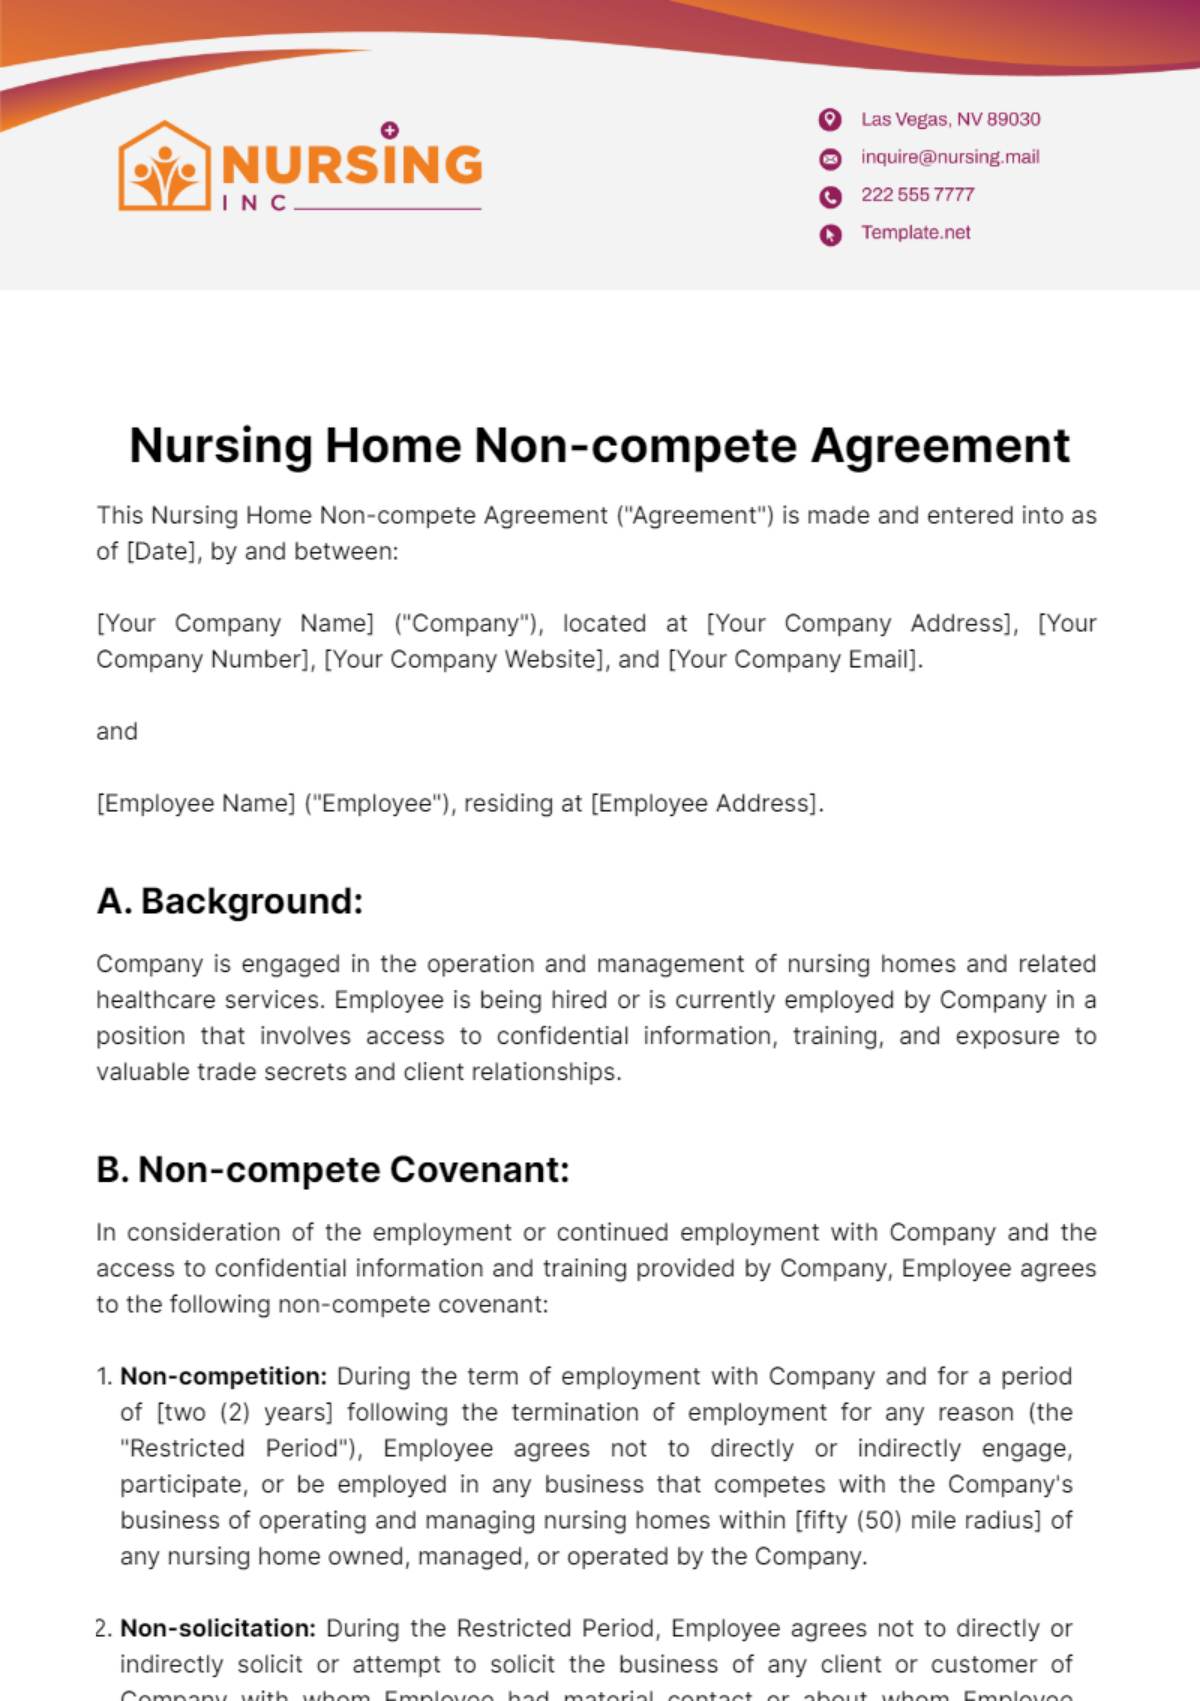 Nursing Home Non-compete Agreement Template